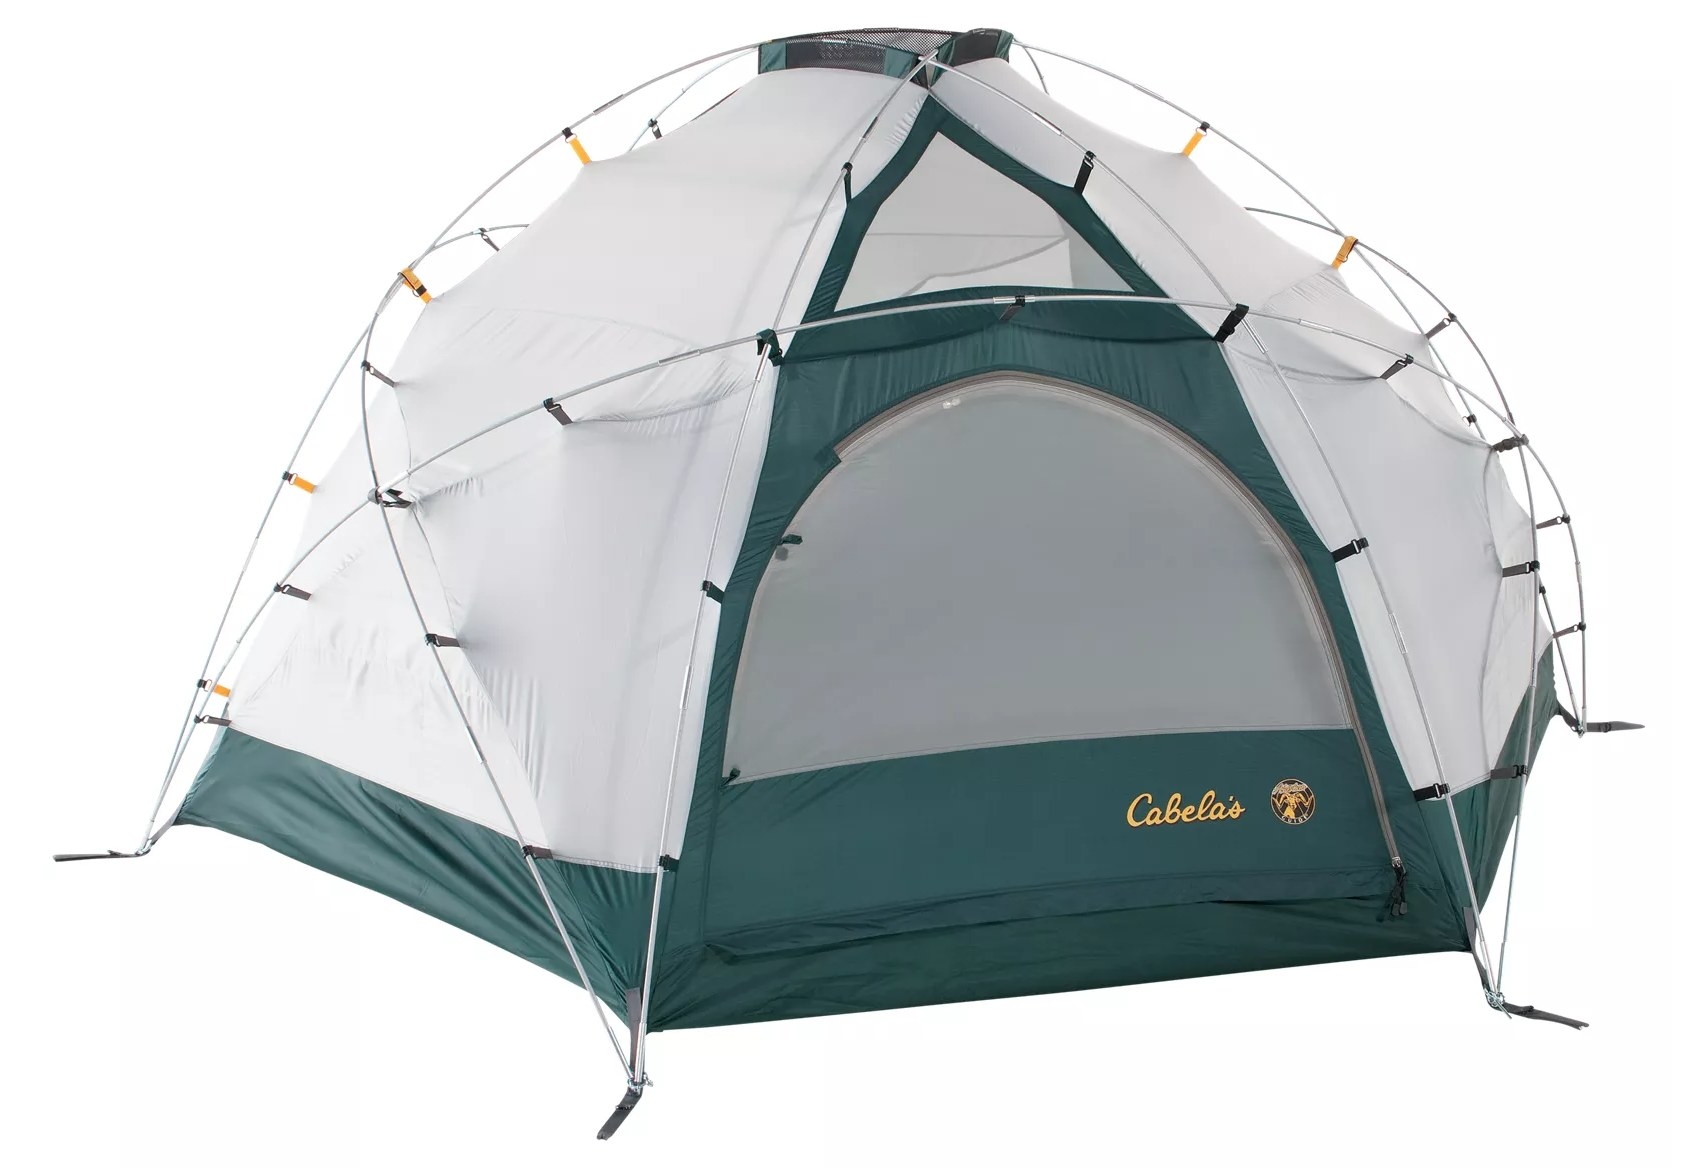 The four-person tent fully built